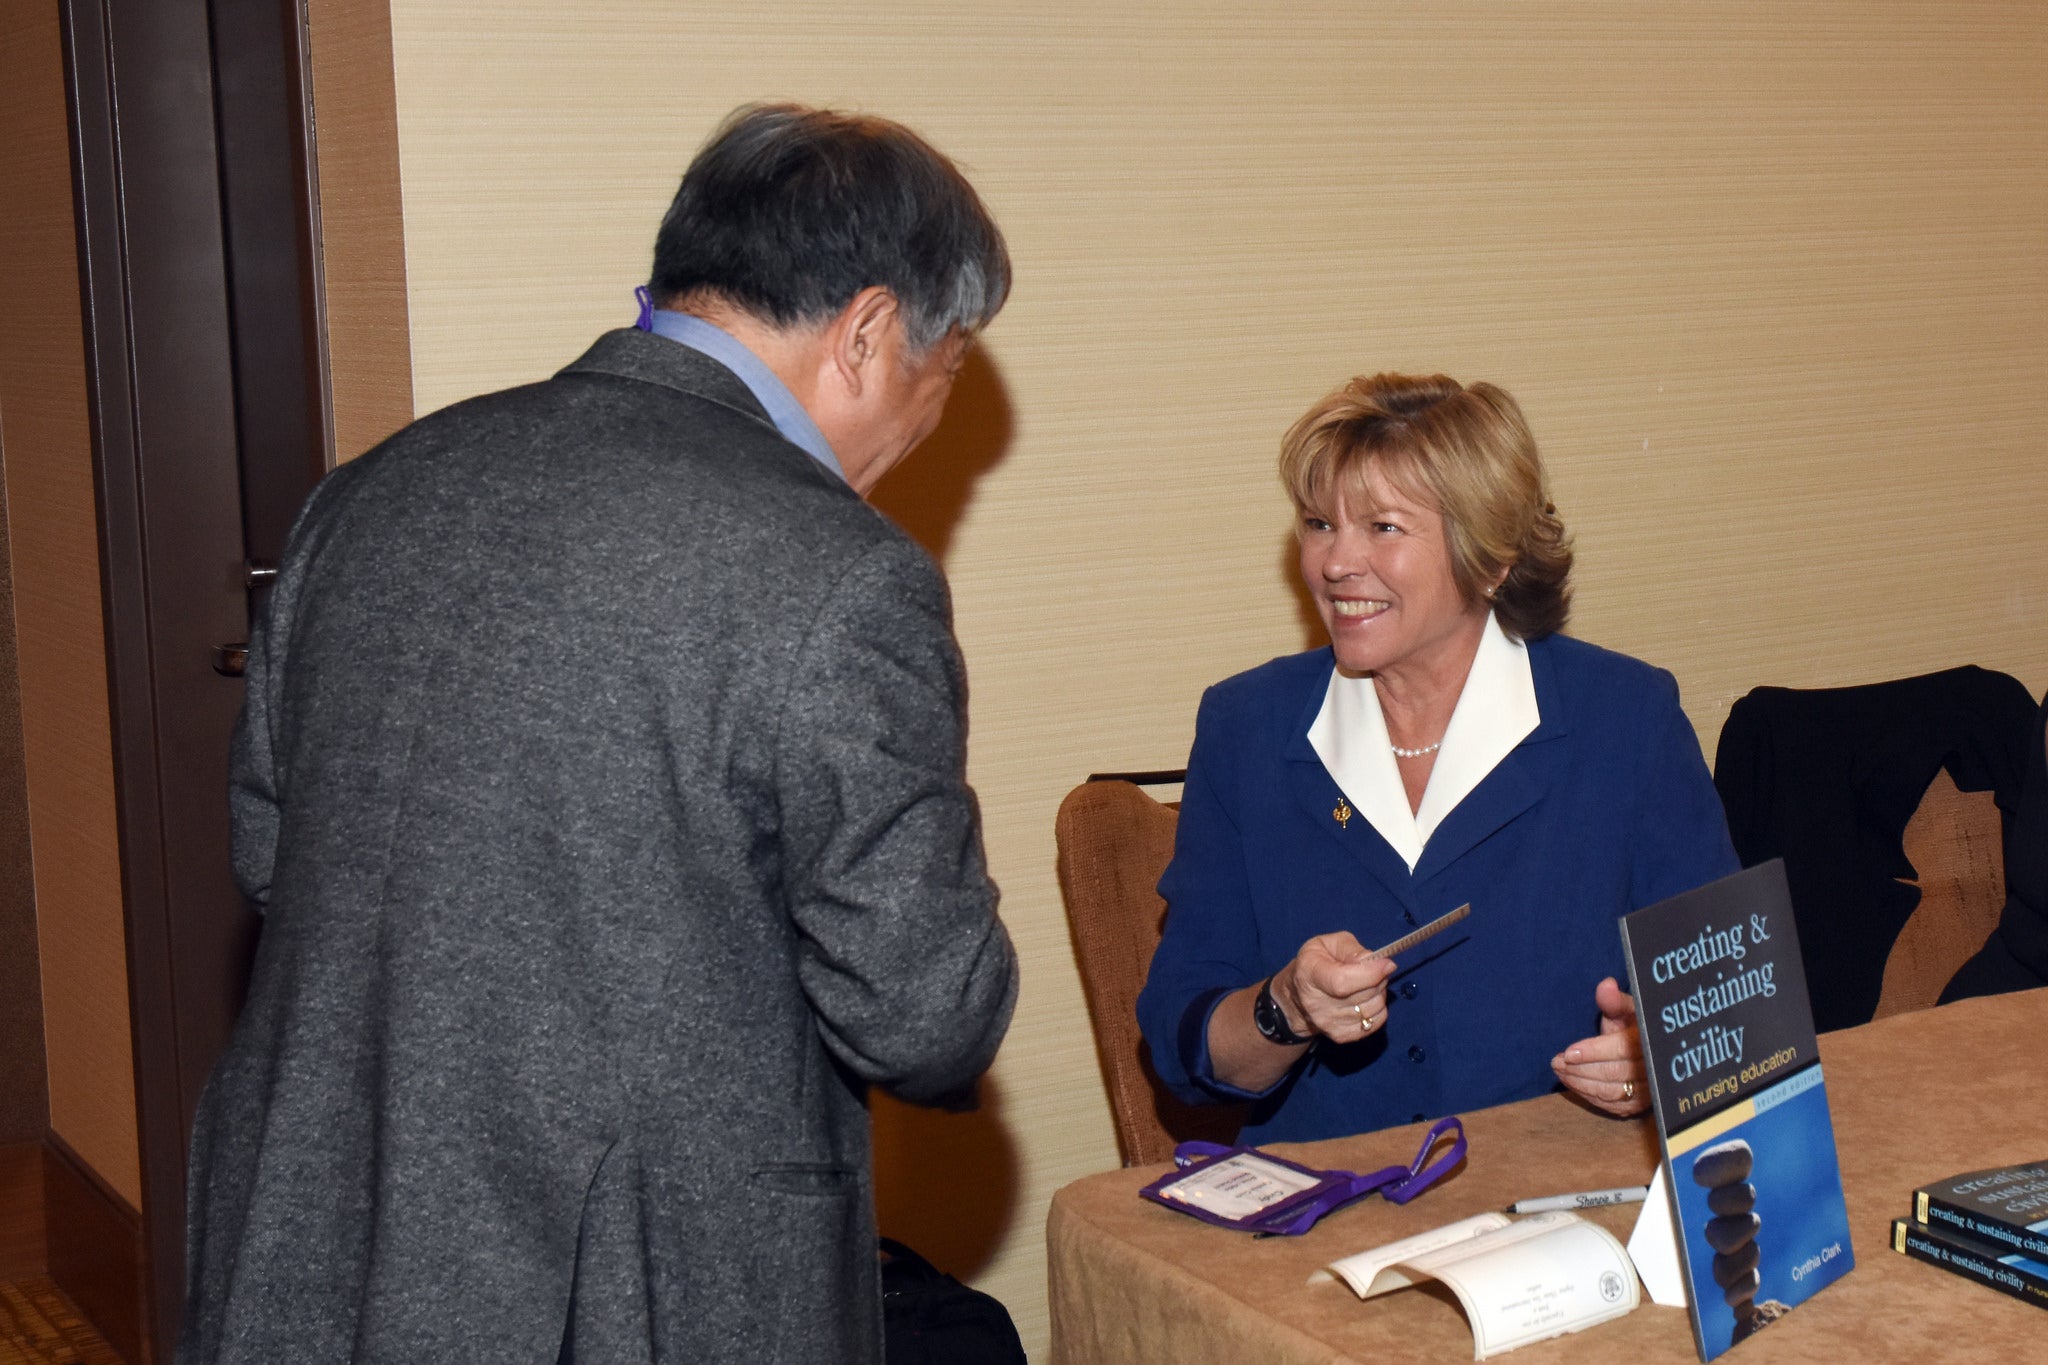 Dr. Clark speaking with someone at a conference